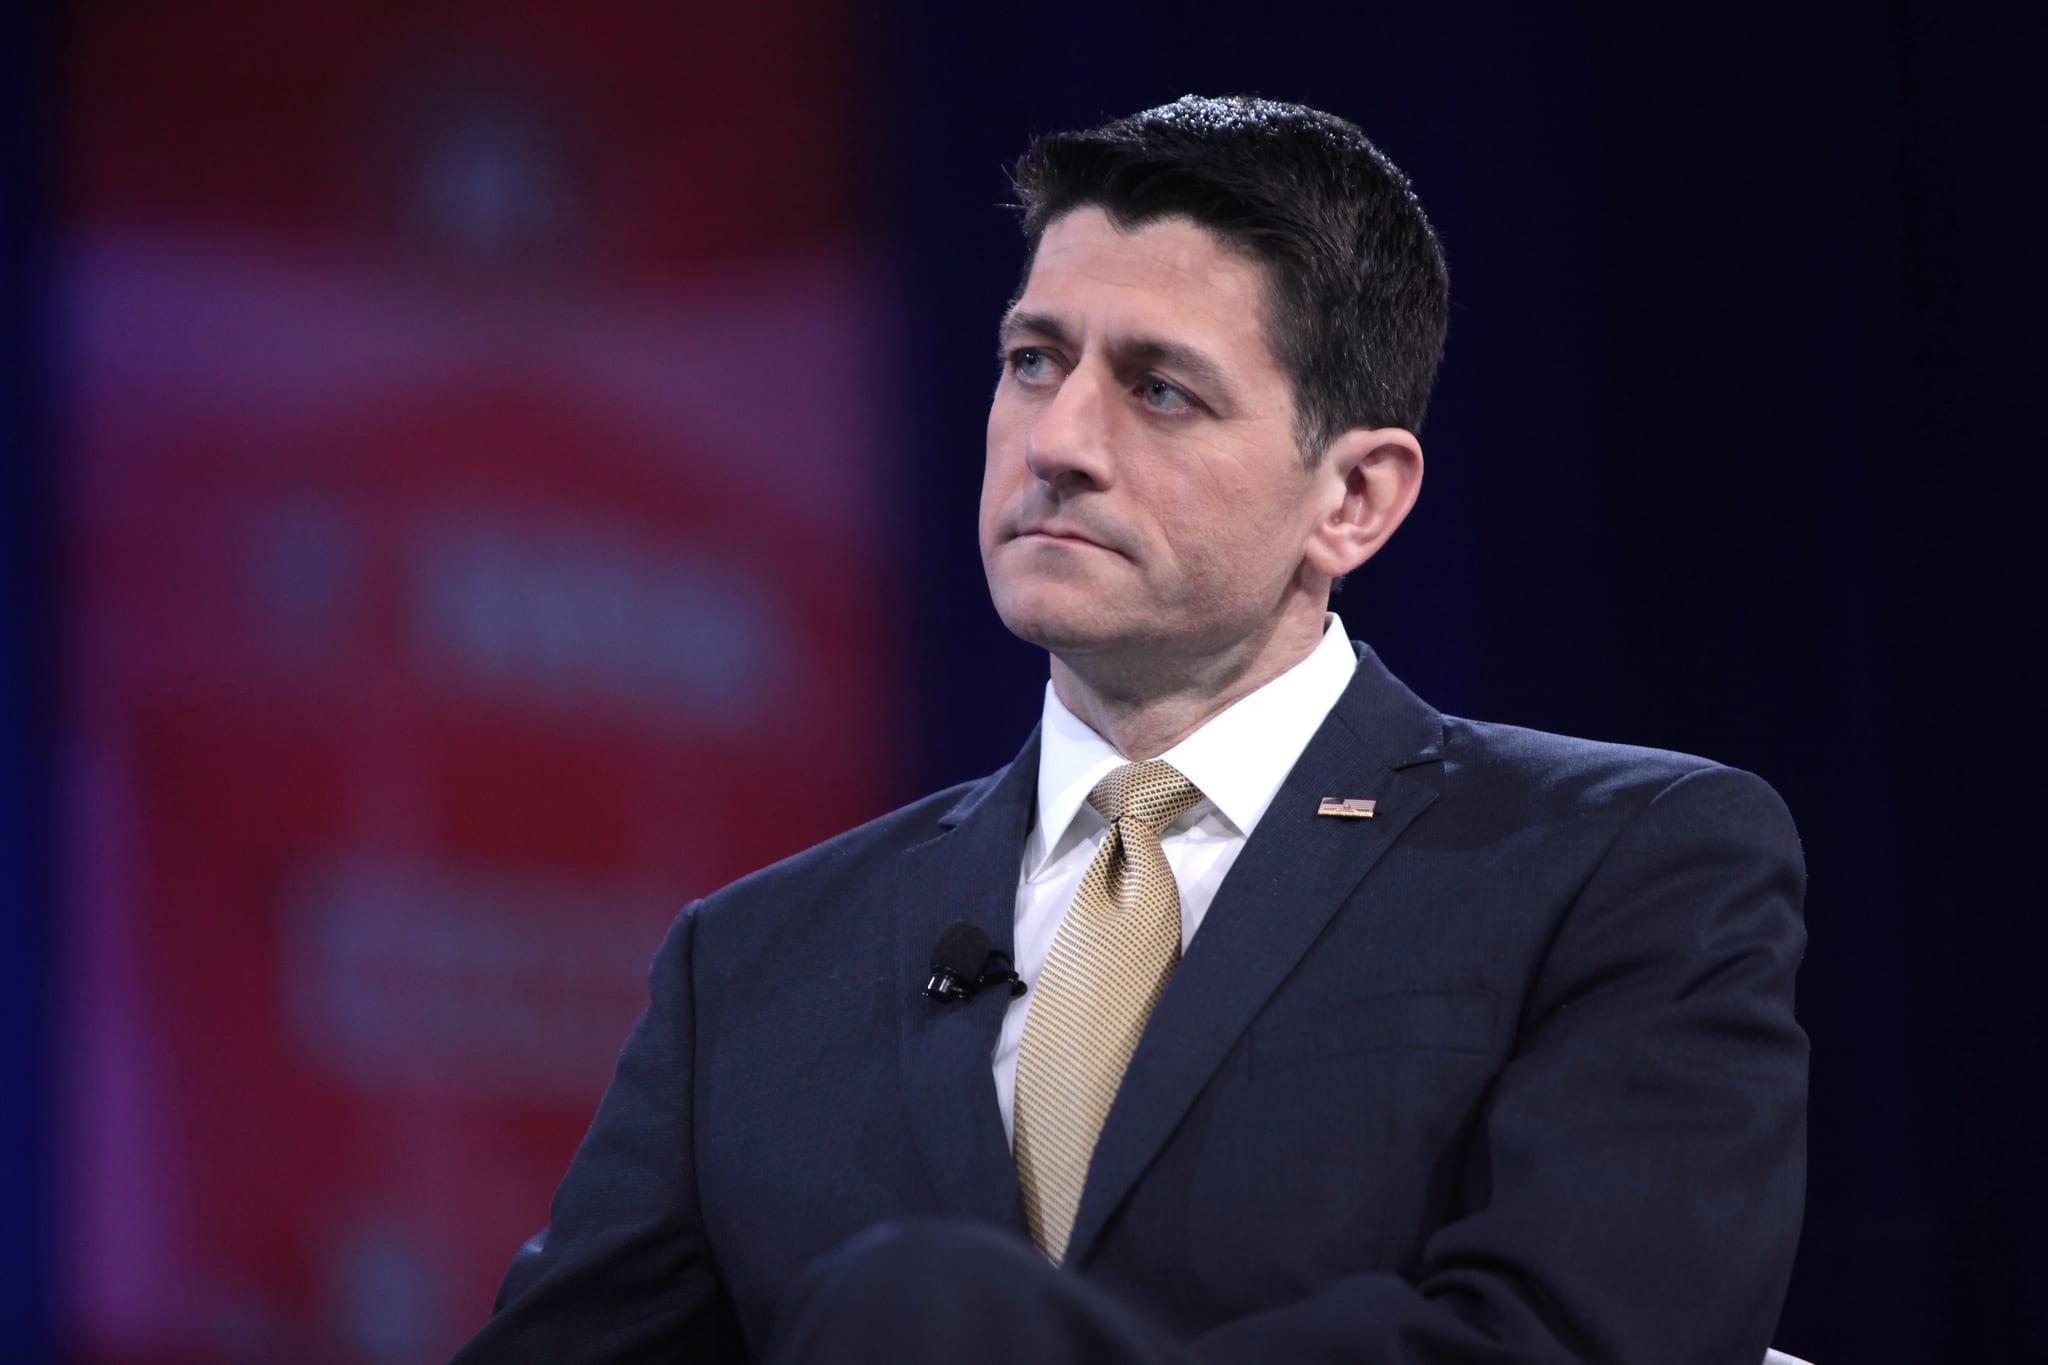 Paul Ryan, Speaker of the House; image by Gage Skidmore, via Flickr, CC BY-SA 2.0, no changes made.